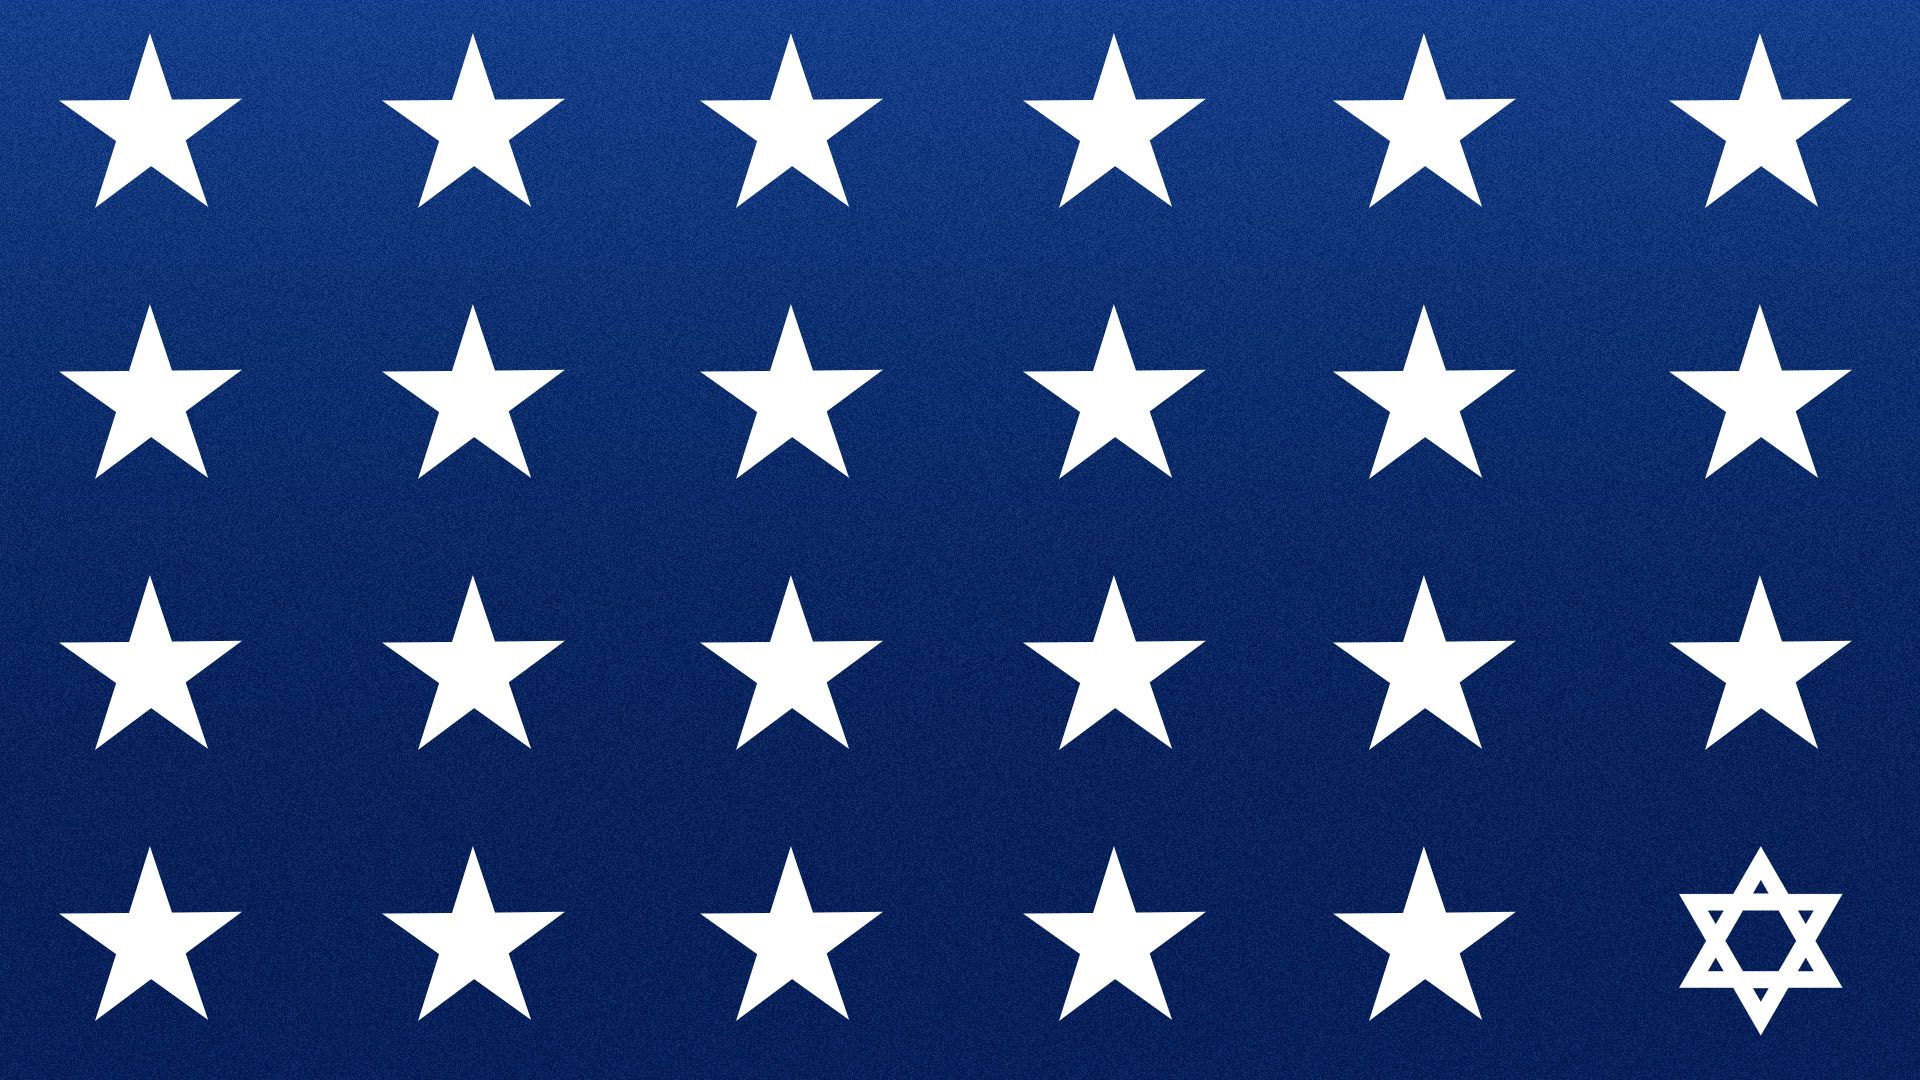  Illustration of a series of white stars on a blue background, with the one in the bottom right being a star of David